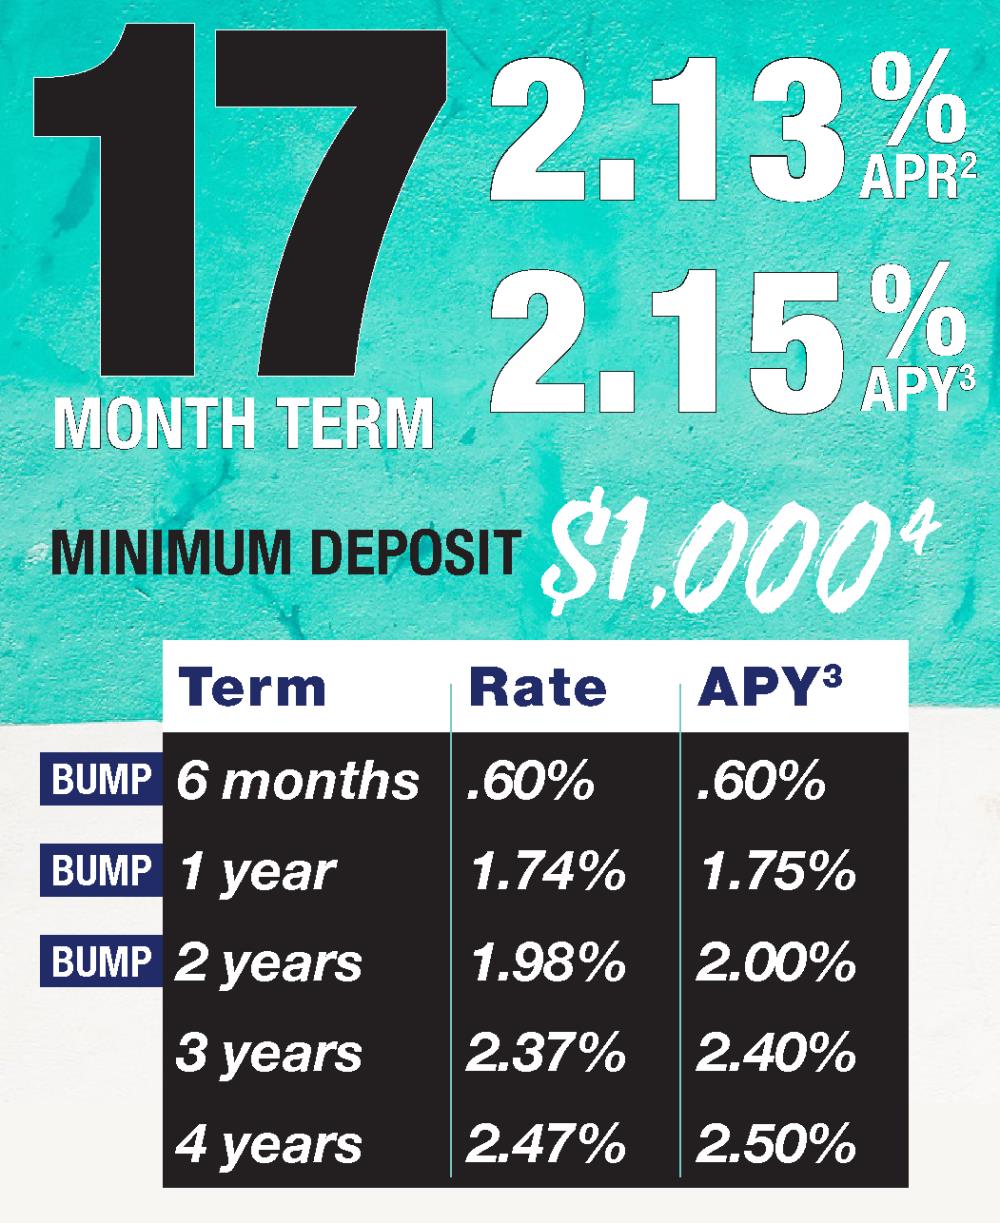 17 month Certificate of Deposit, 2.13% APR 2.15 apy, MINIMUM DEPOSIT $1,000 4,  visit https://www.ourcu.com/about/rates/ for addition rates and terms available